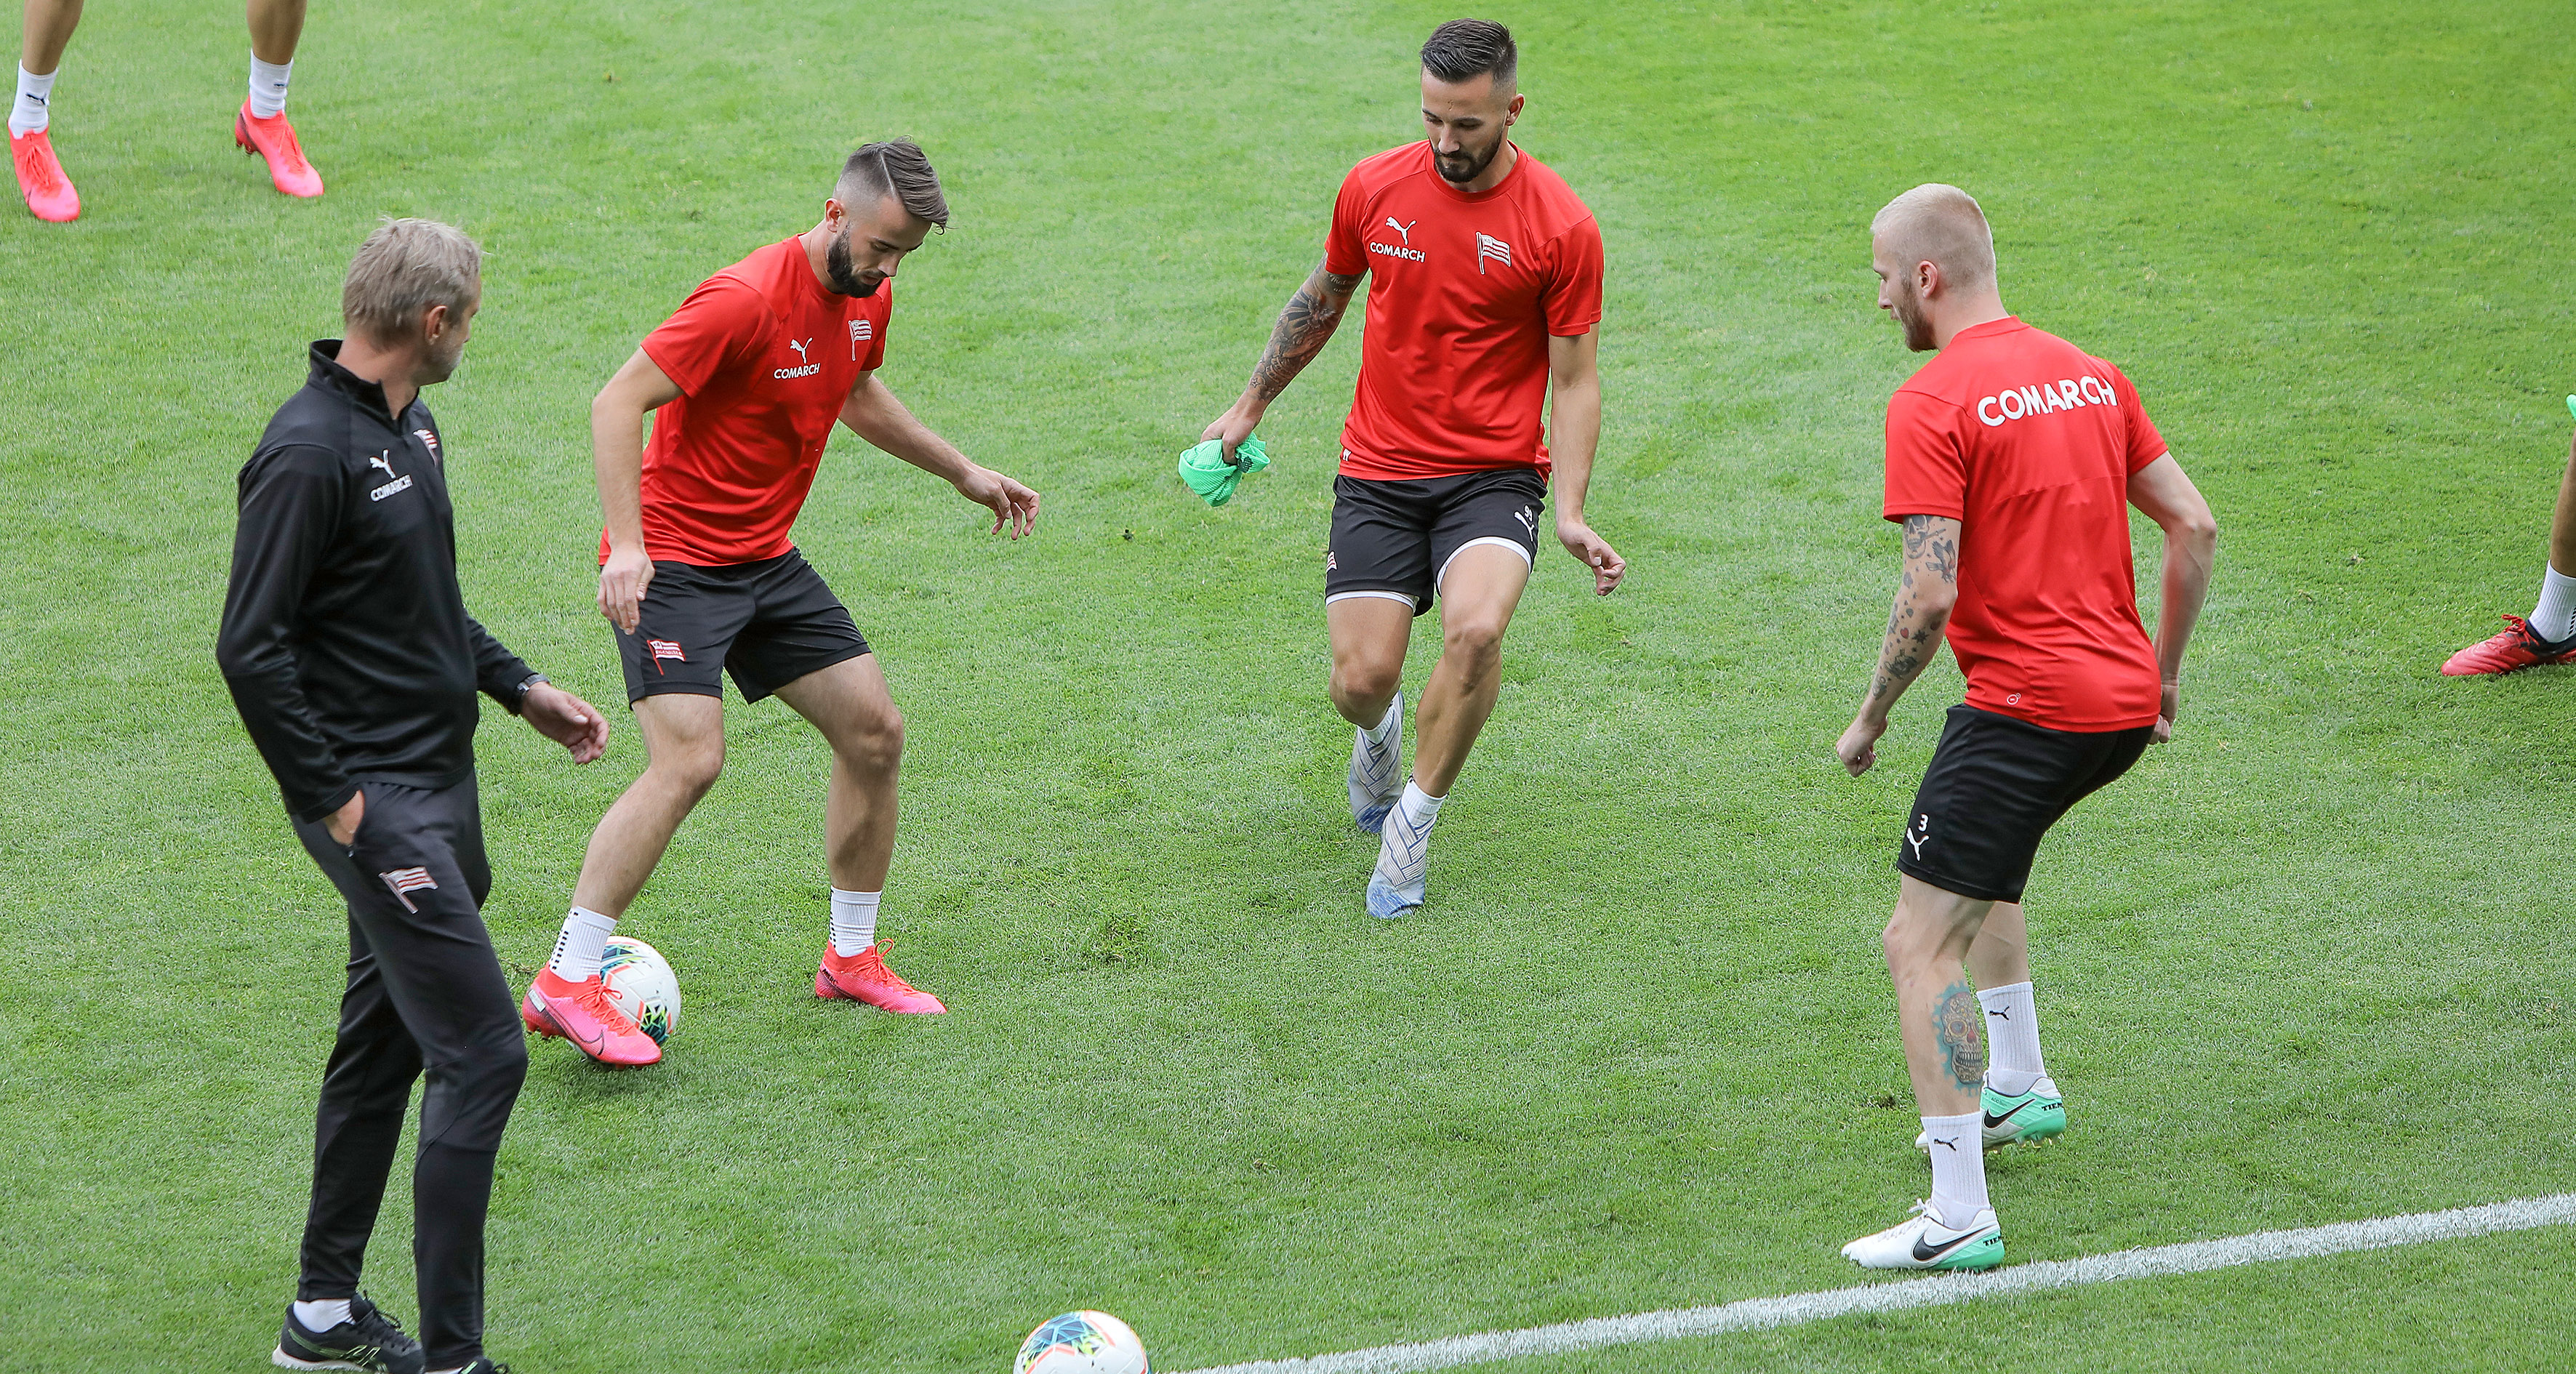 The official training session before the Polish Cup final [PHOTOS]